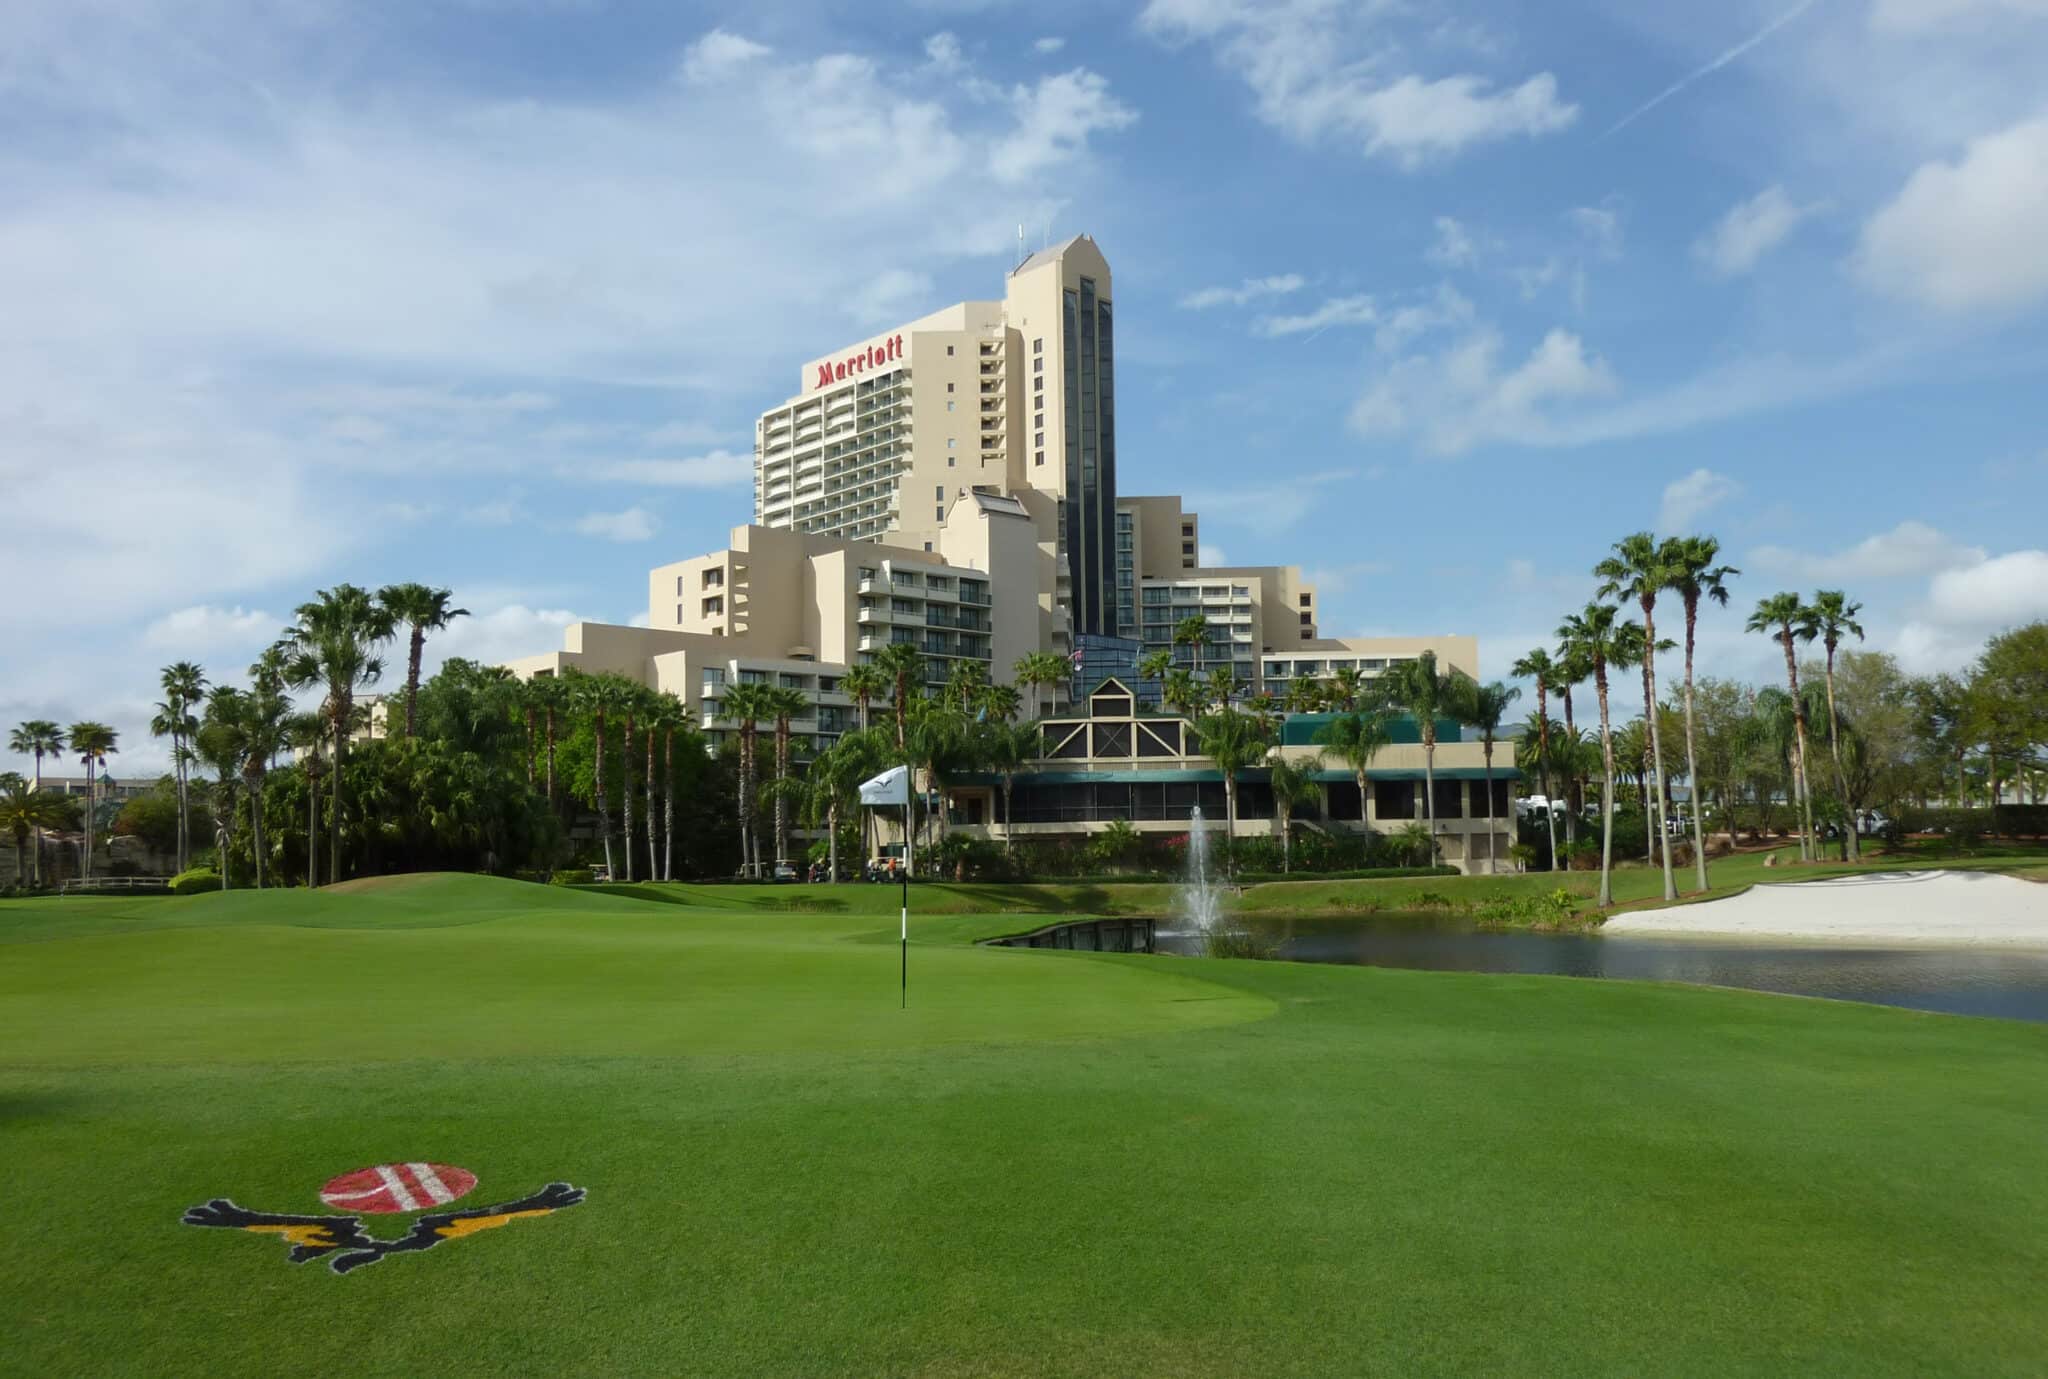 image of golf course in front of Orlando hotel